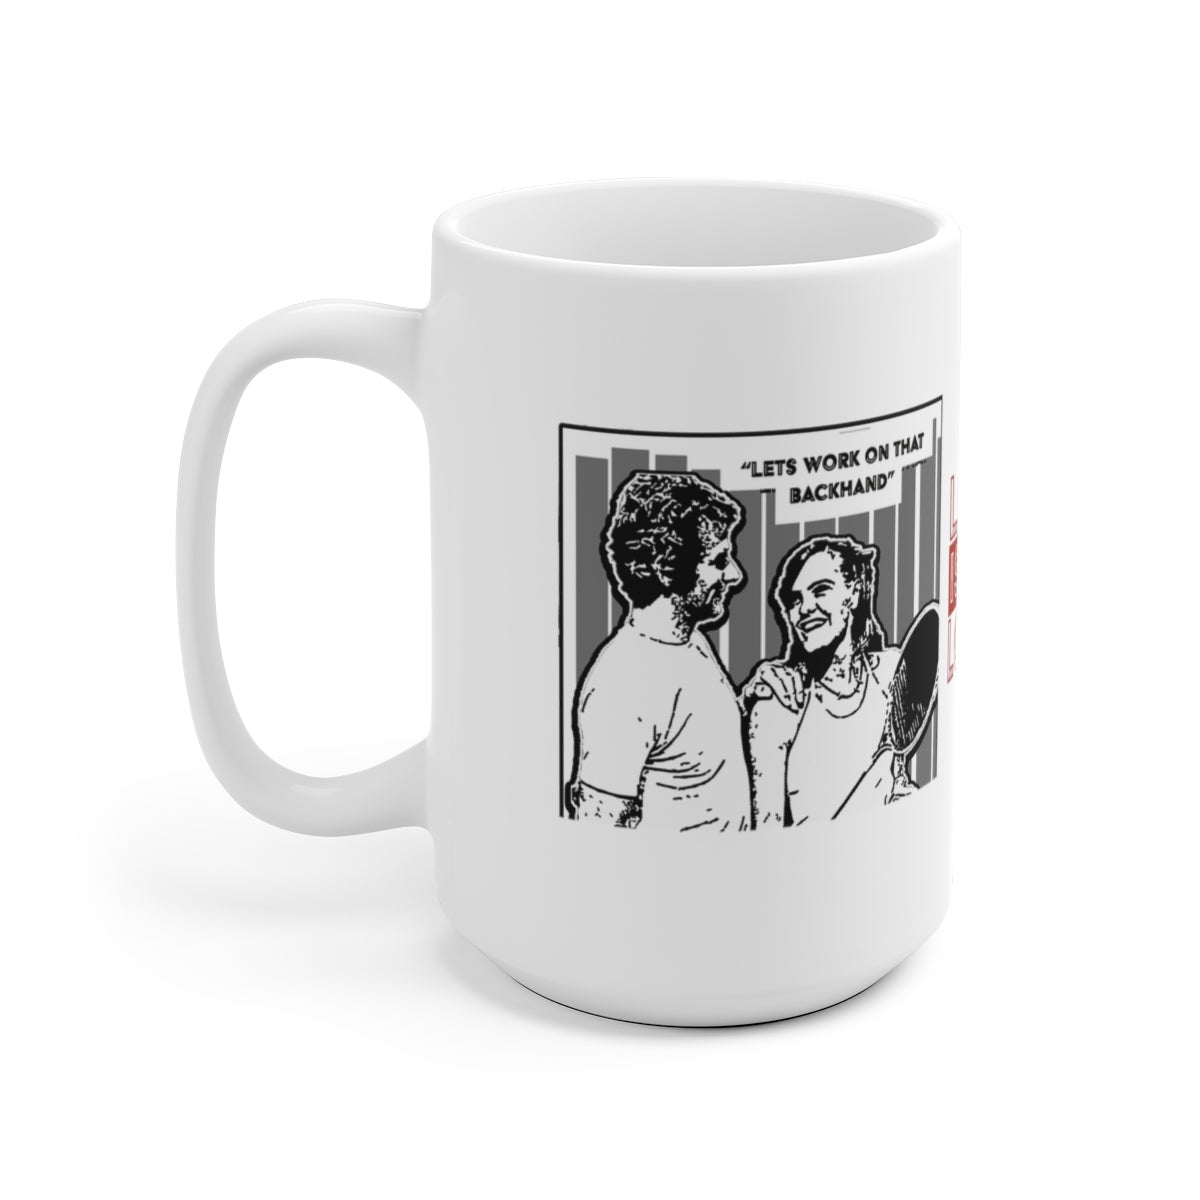 Love Is For Losers Funny Backhand Tennis Mug